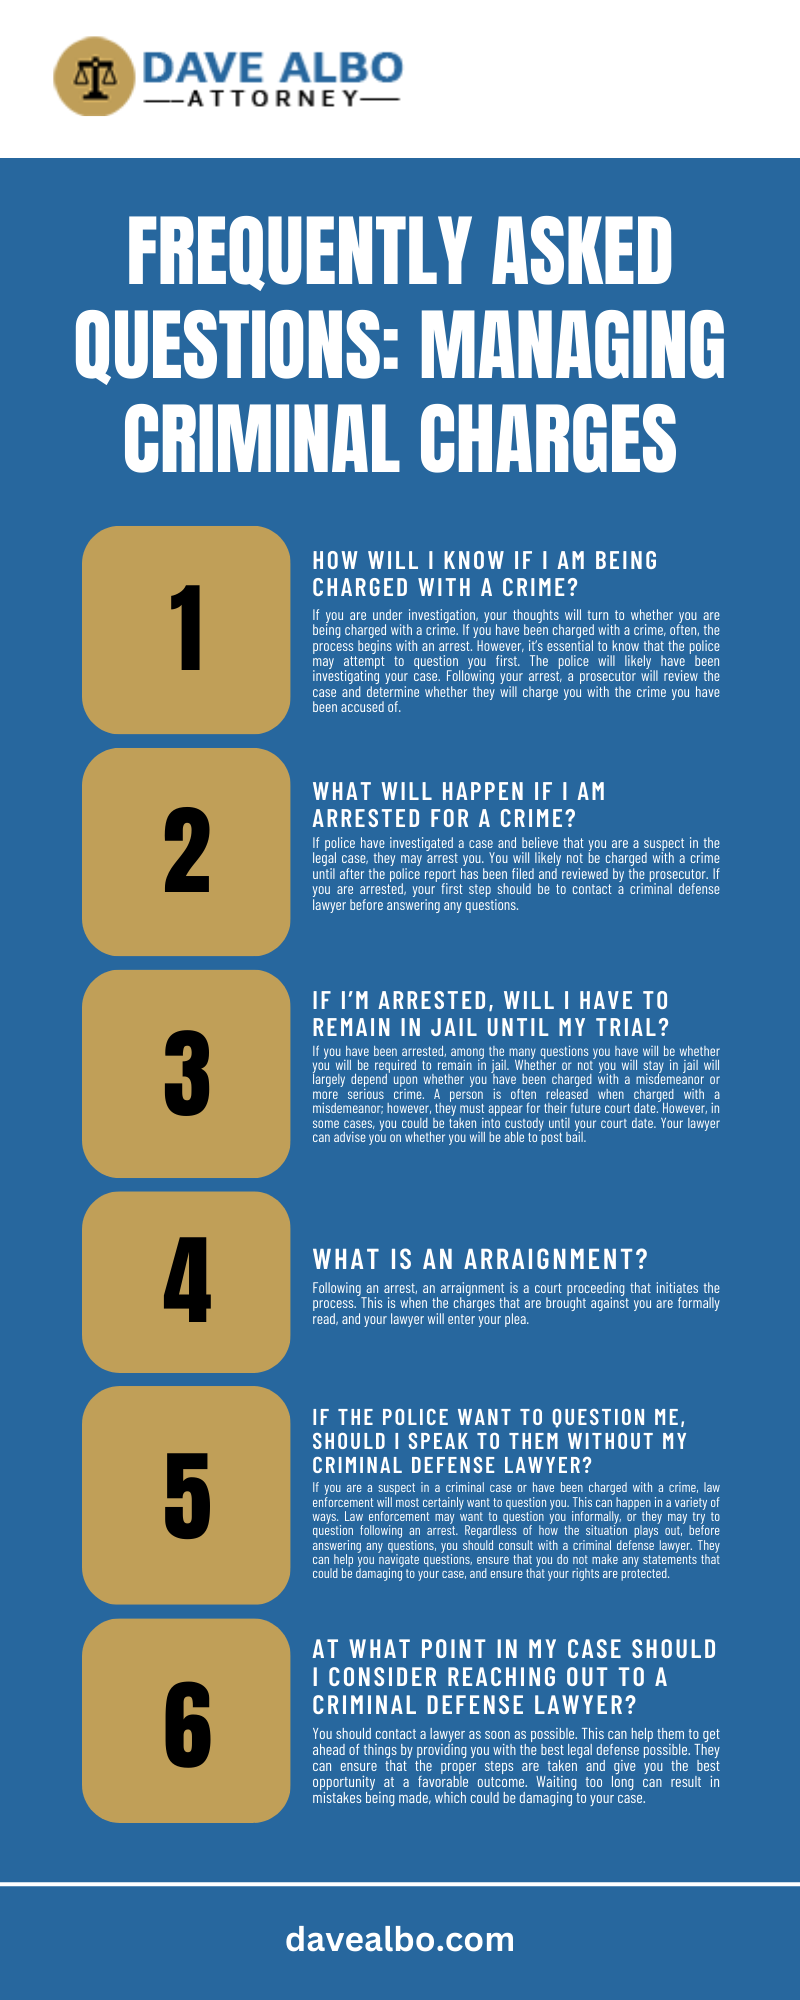 FREQUENTLY ASKED QUESTIONS: MANAGING CRIMINAL CHARGES INFOGRAPHIC